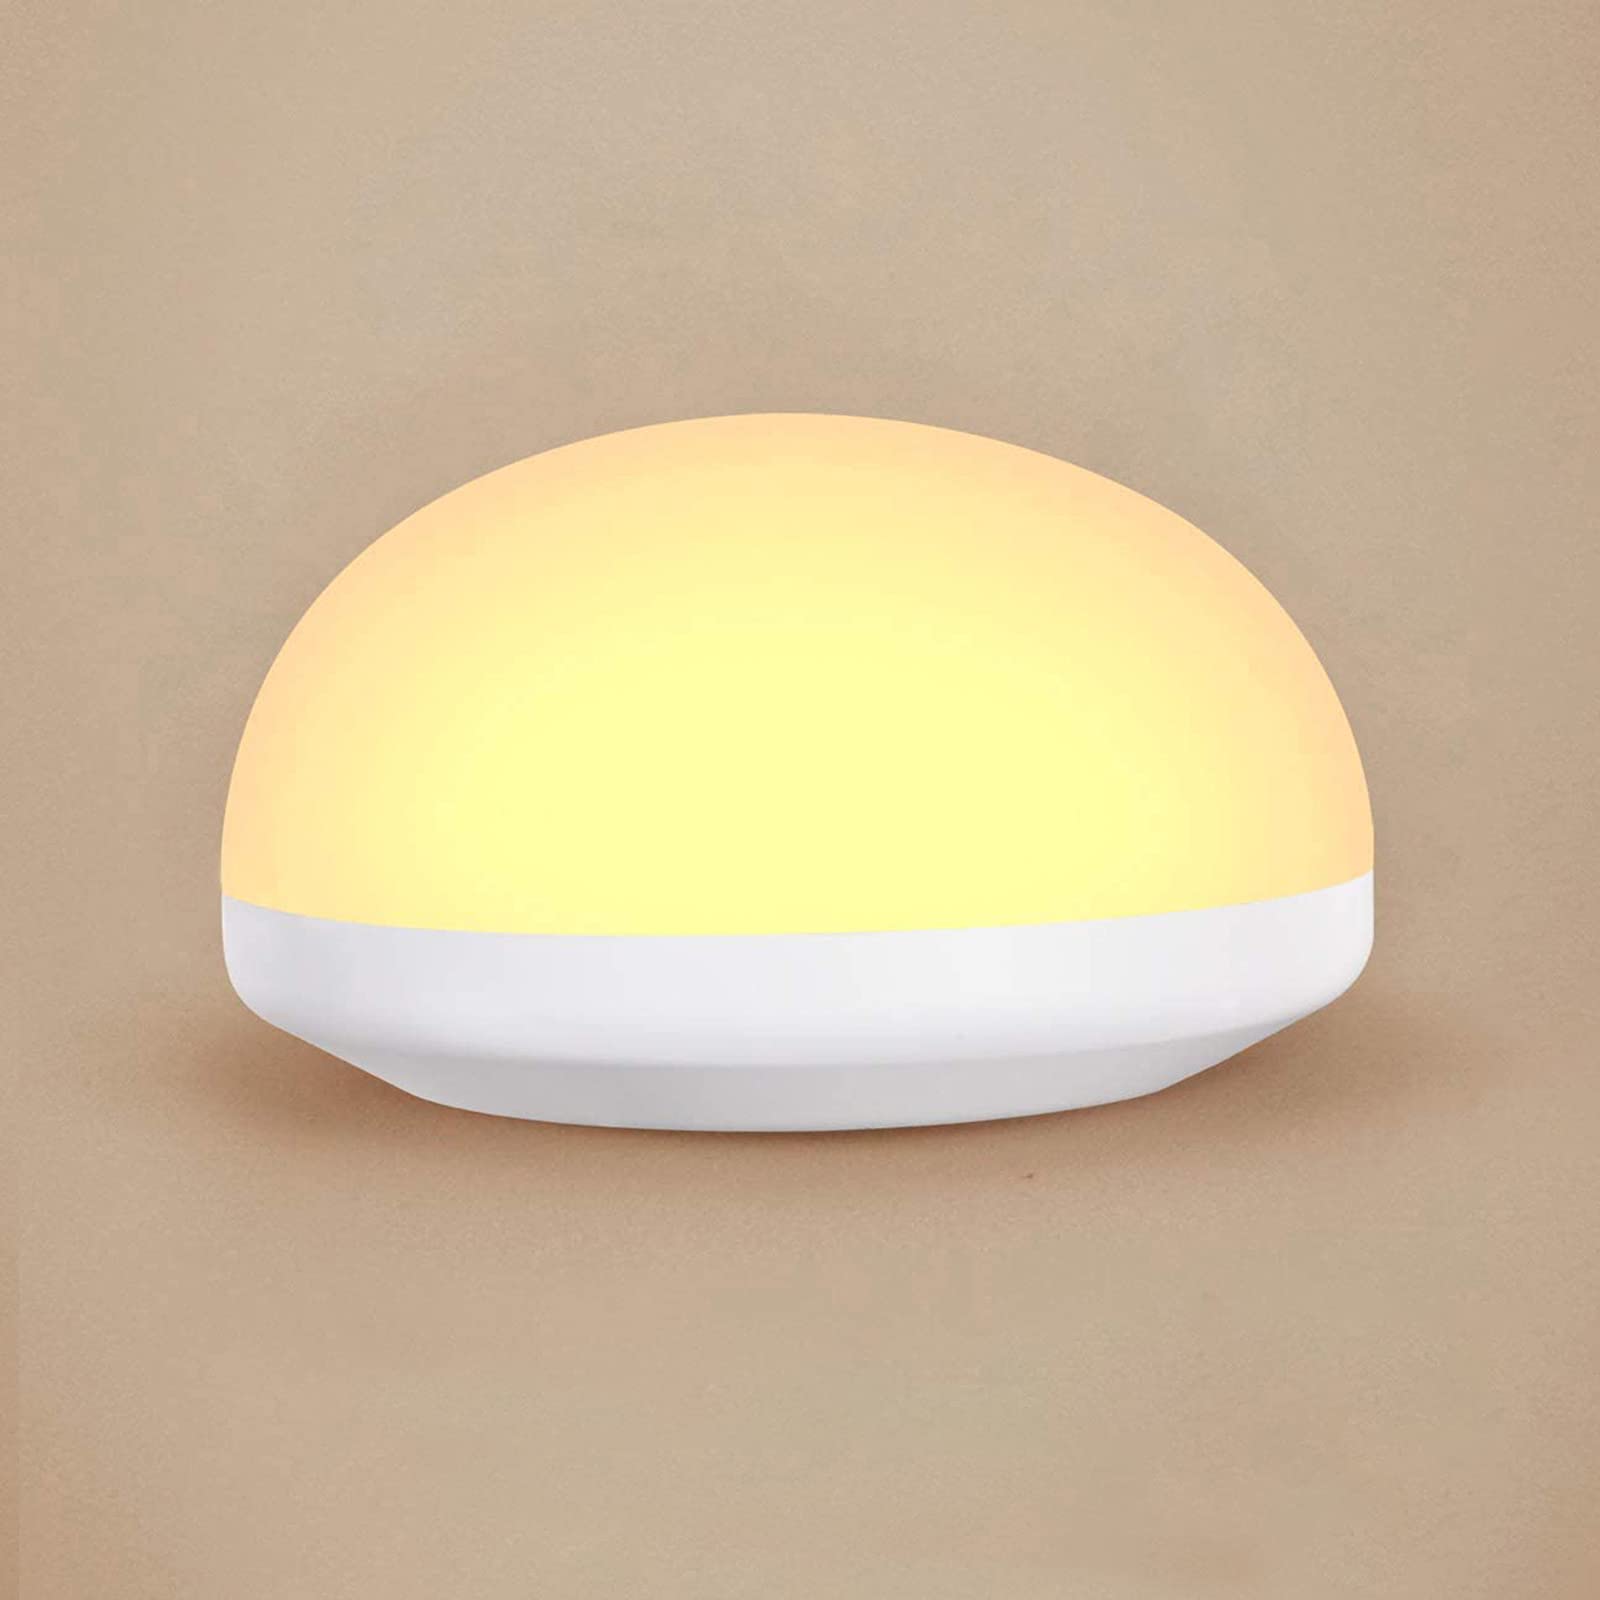 Night Light for Kids,Touch Bedside lamp,Rechargeable Wireless LED Nursery lamp for Baby Children Breastfeeding Bedroom [Energy Class A++]